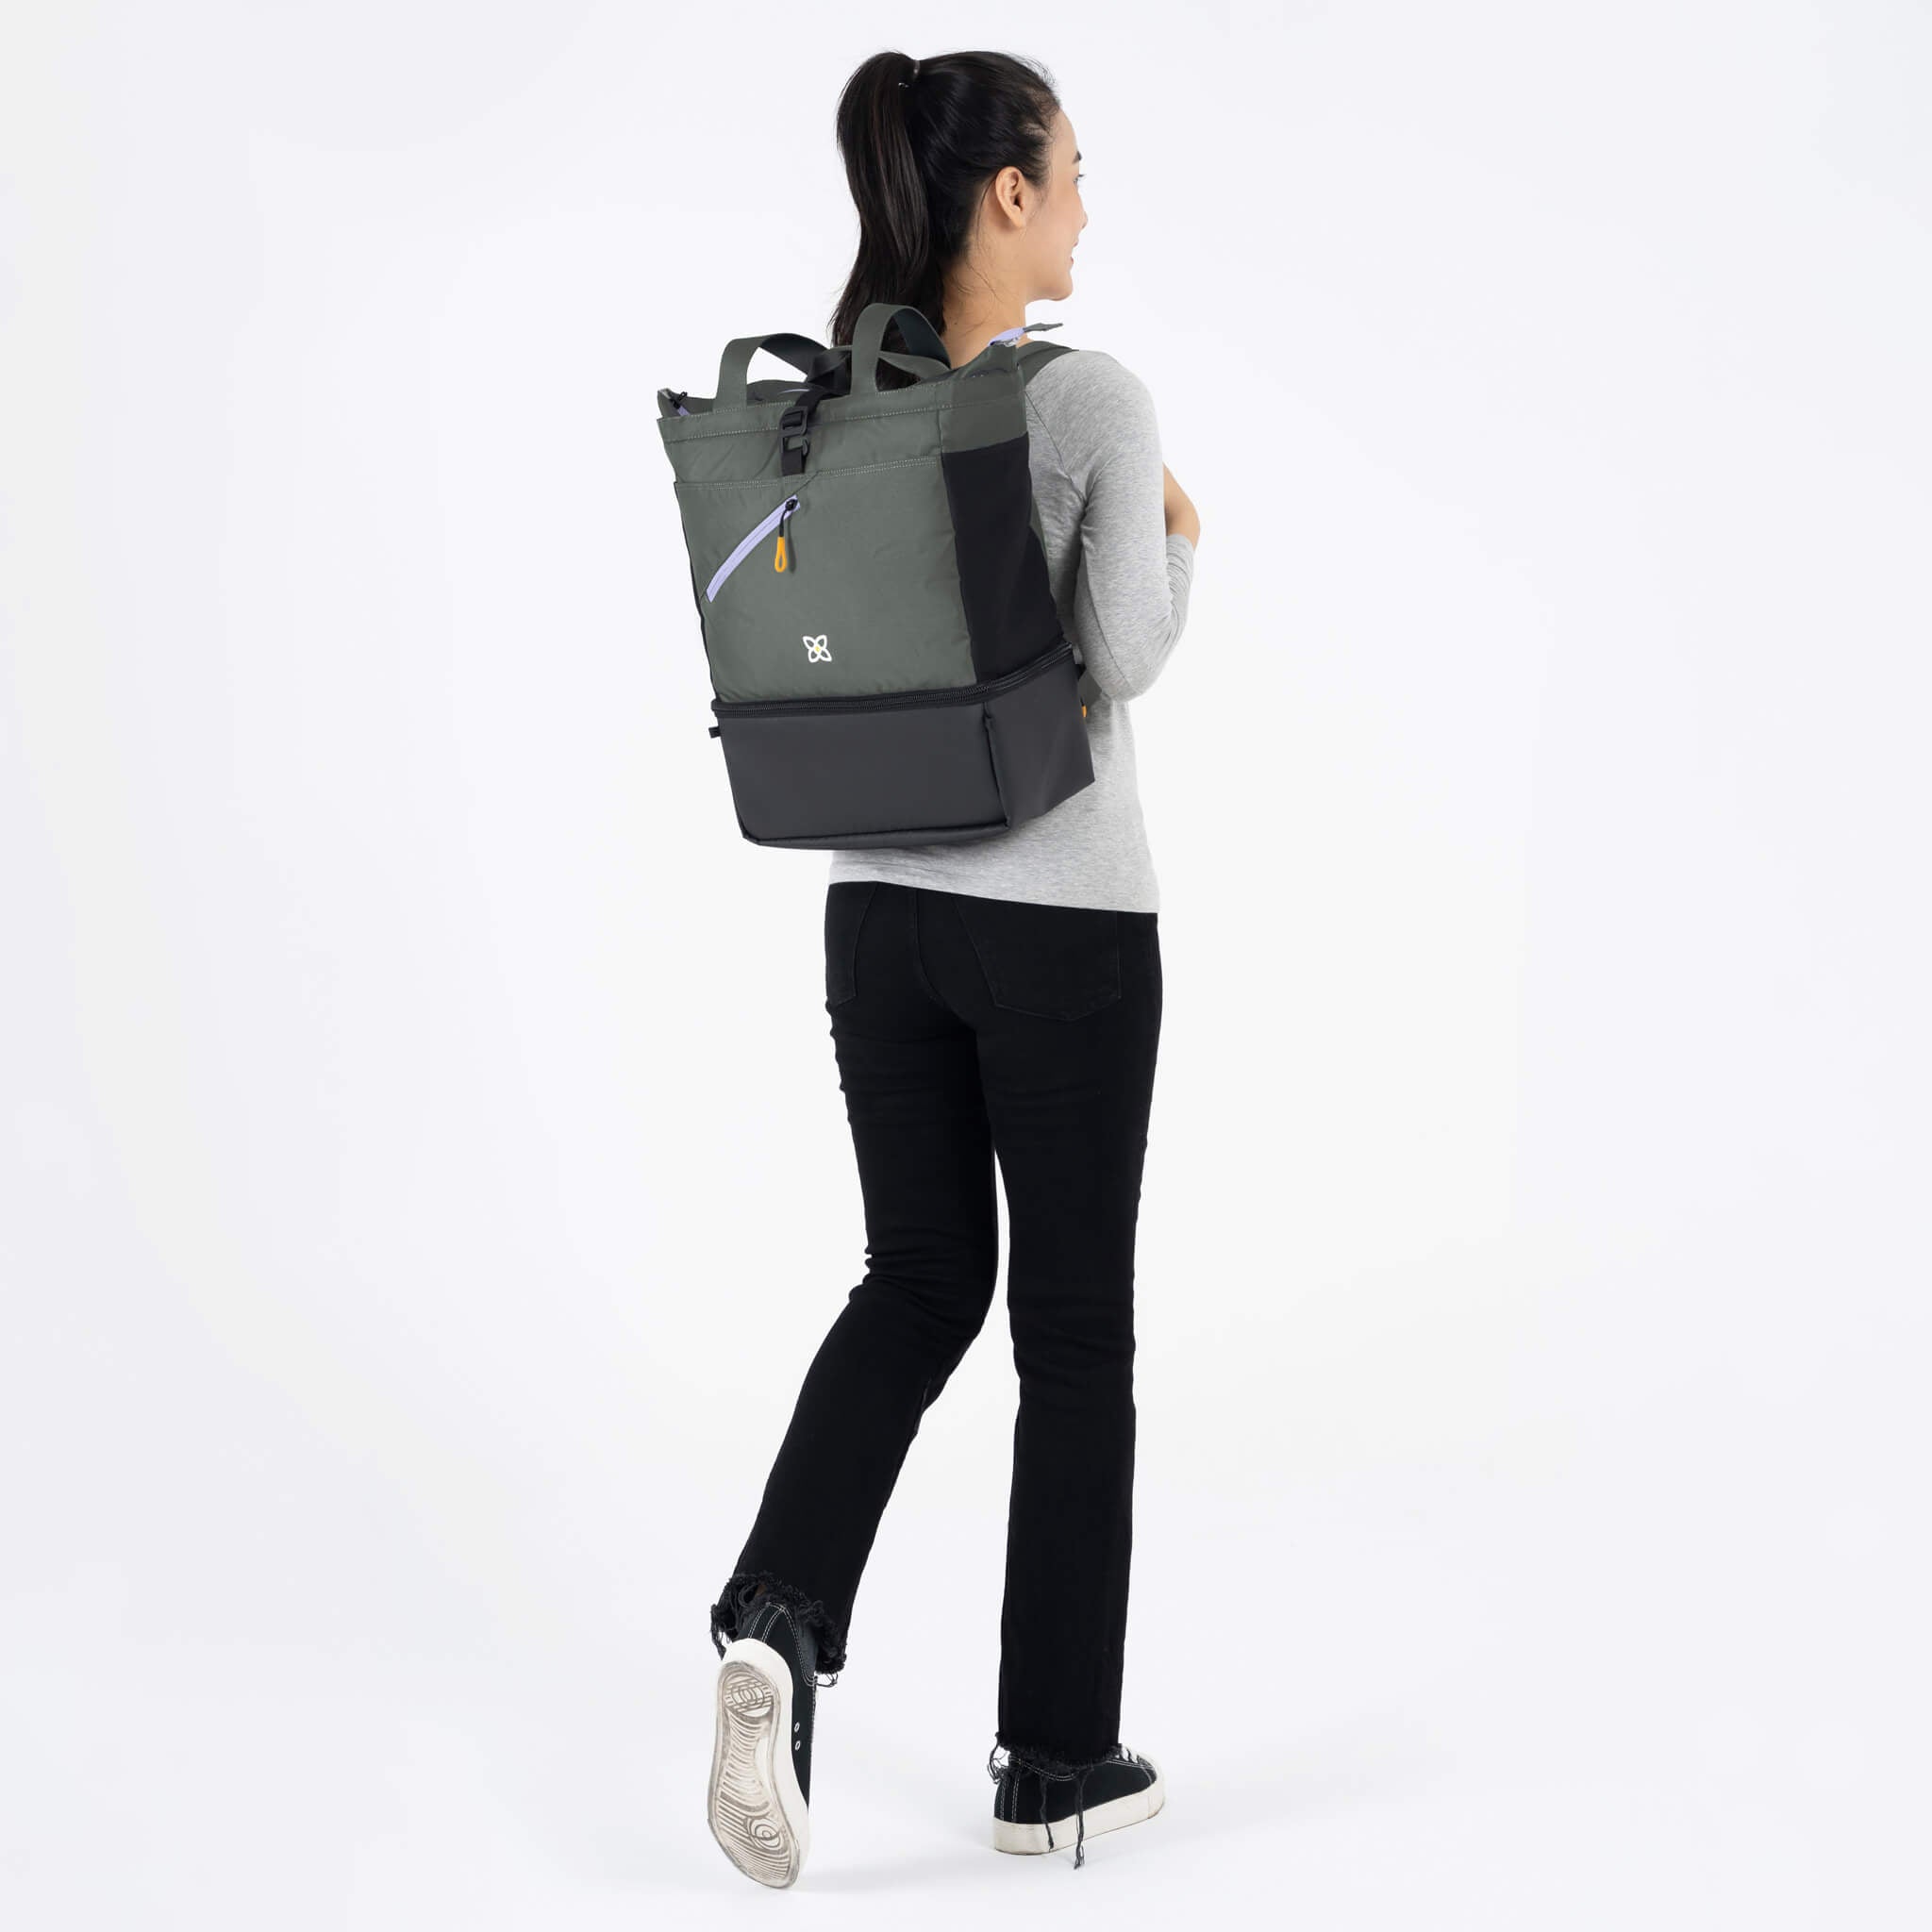 A model facing to the back. She is wearing a gray top and black leggings. She carries Sherpani bag, the Terra in Juniper, as a backpack. 